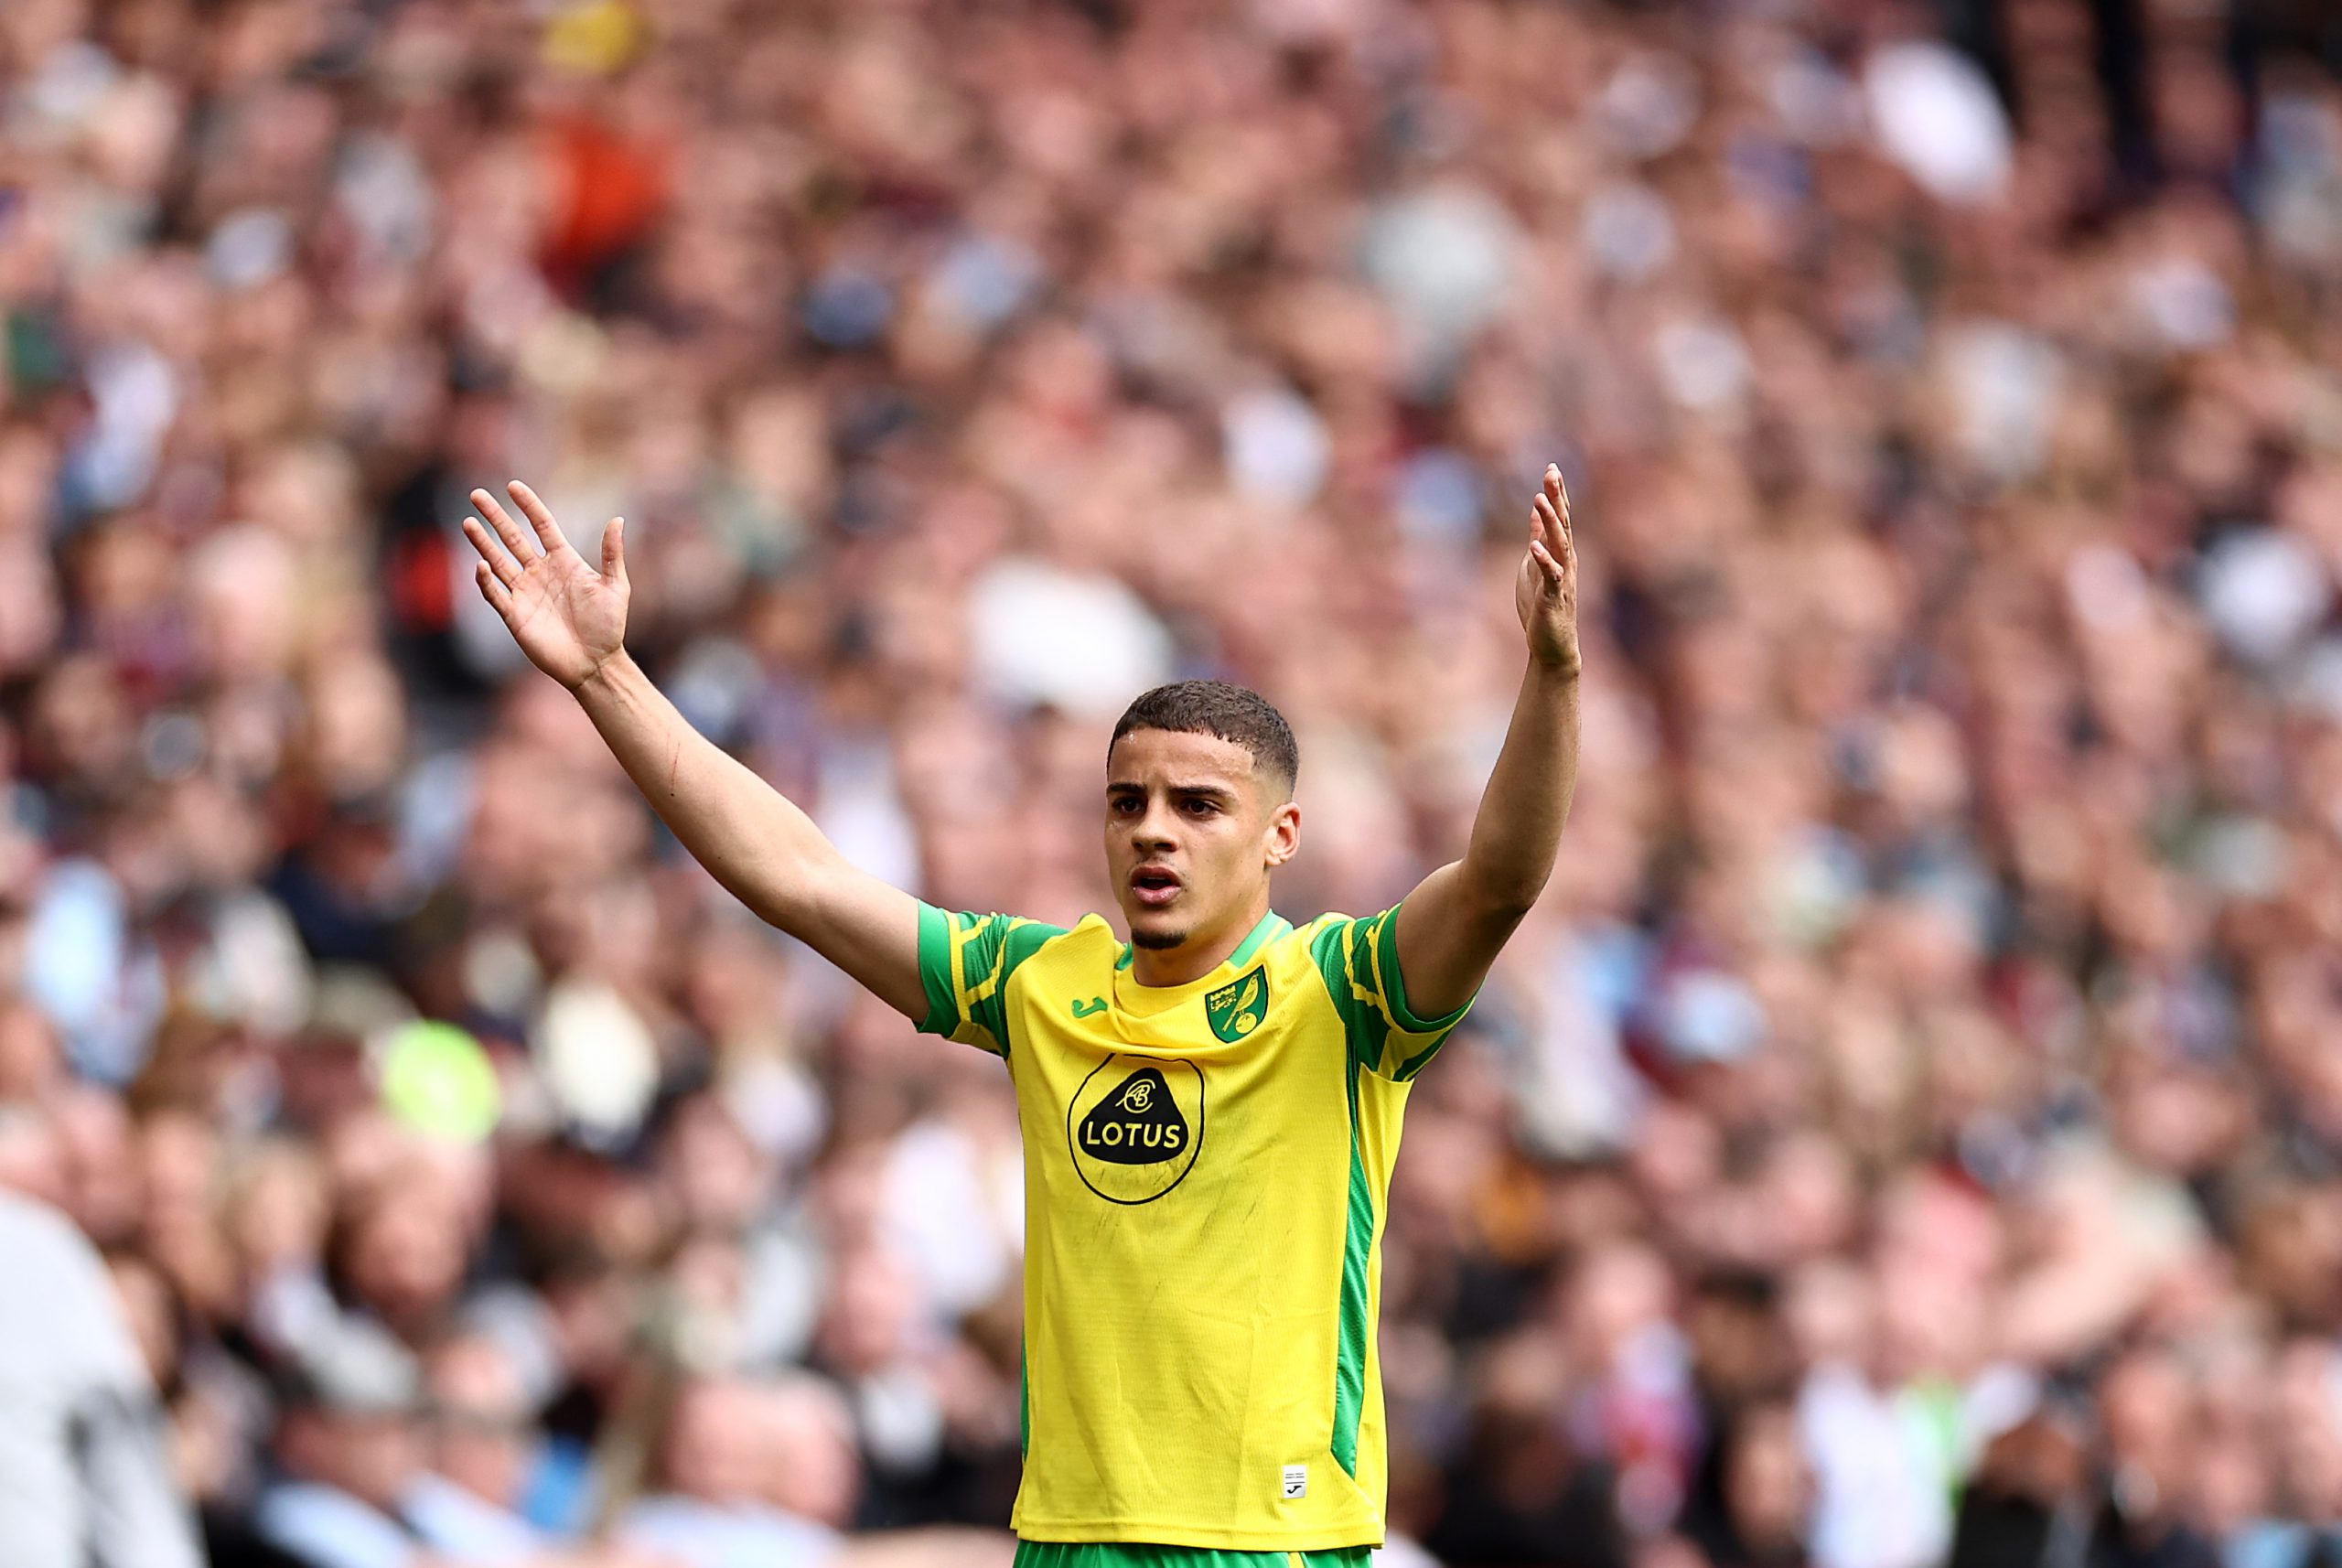 Max Aarons in action for Norwich City. (Photo by Ryan Pierse/Getty Images)